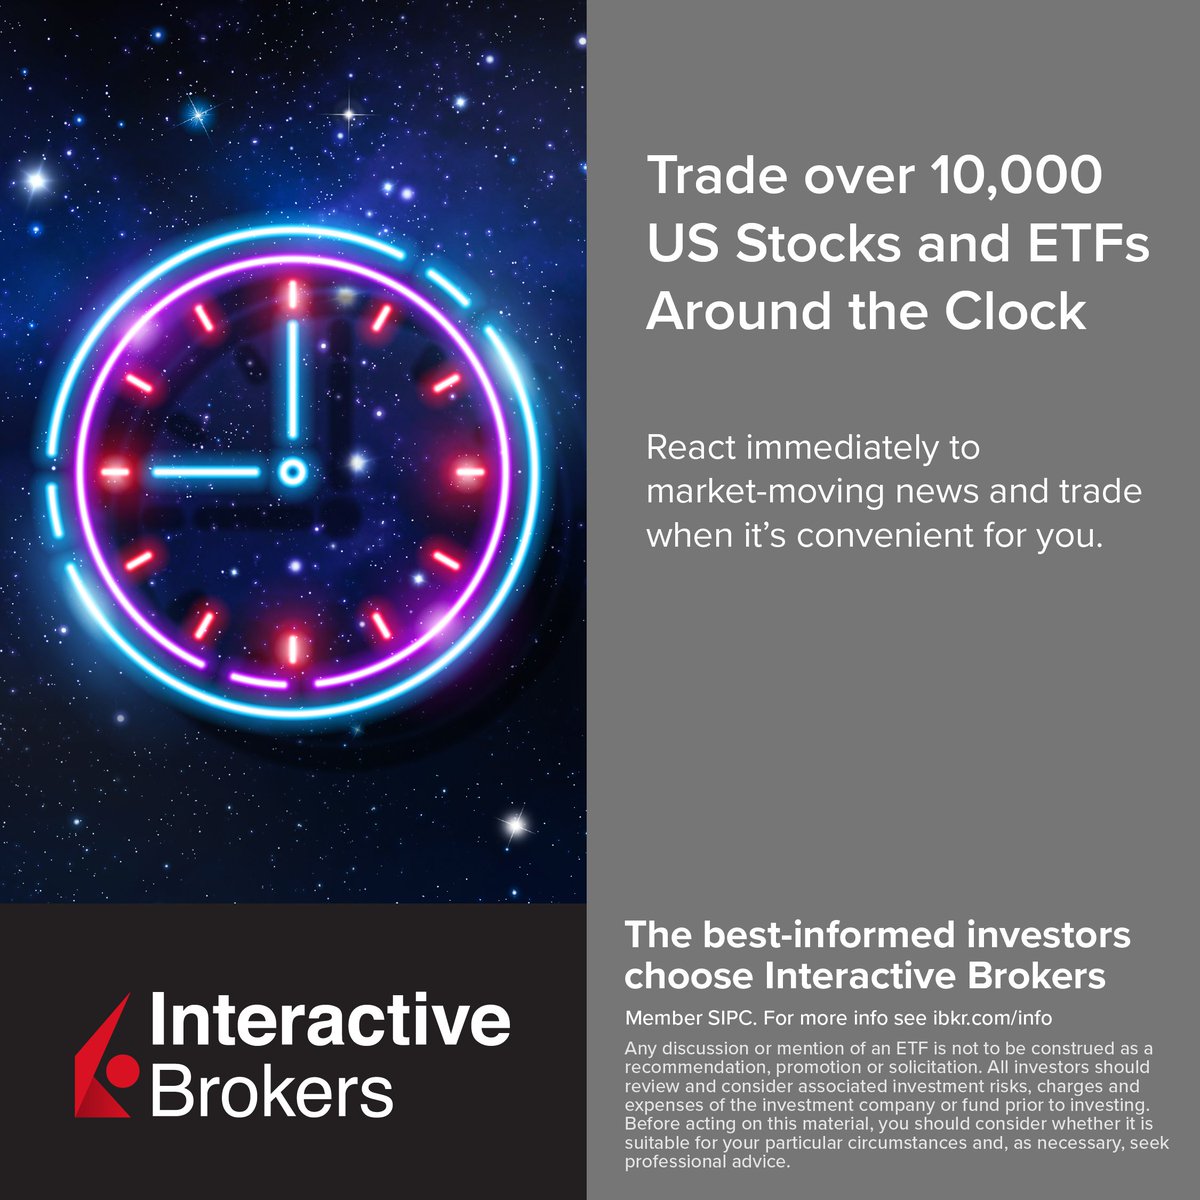 Trade around the clock. We've expanded Overnight Trading to include over 10,000 US Stocks and ETFs. Trade when it's convenient for you: spr.ly/nightt #IBKR #OvernightTrading #ETFs